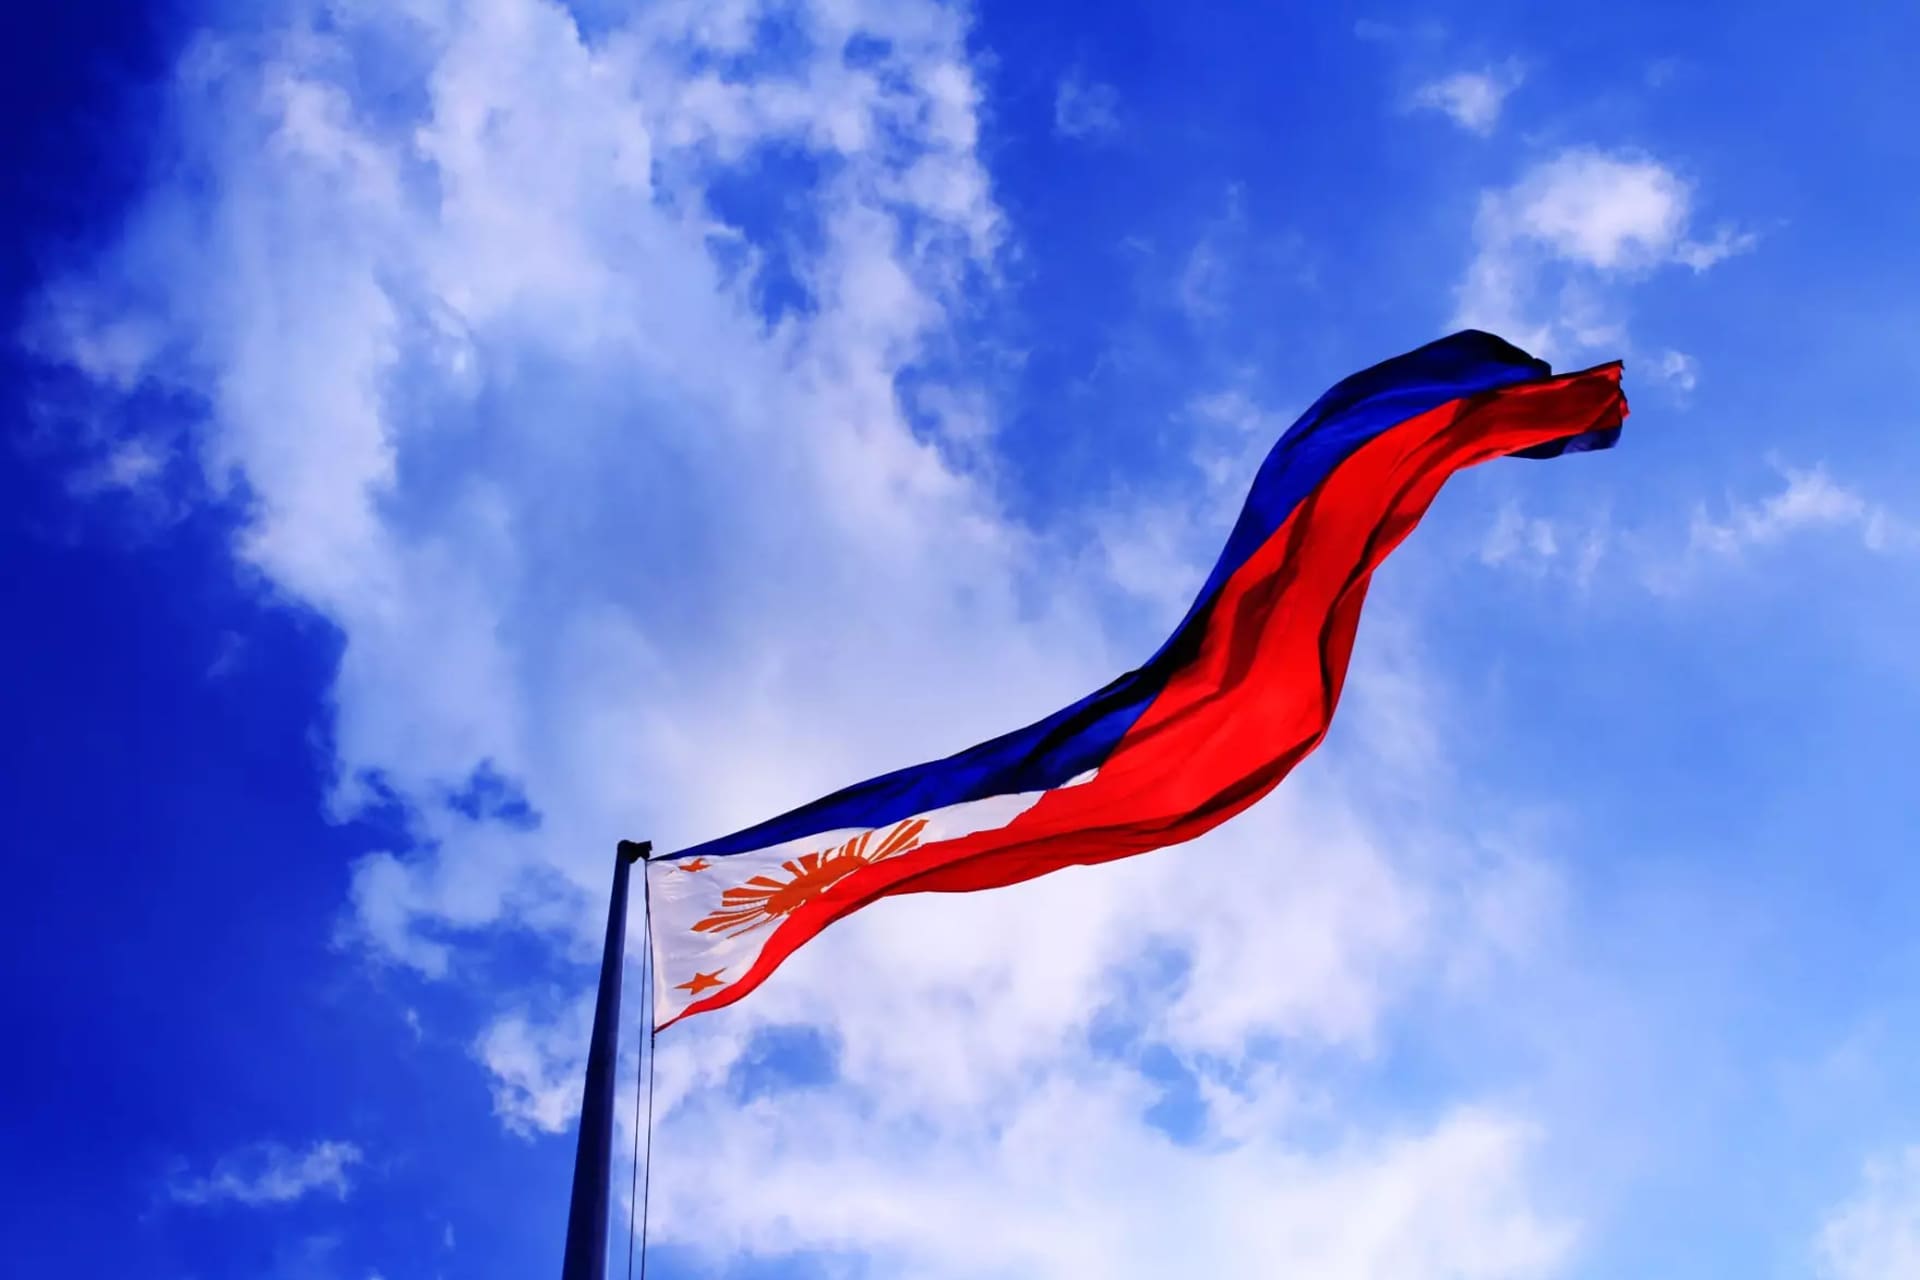 A Filipino flag flapping in the wind.